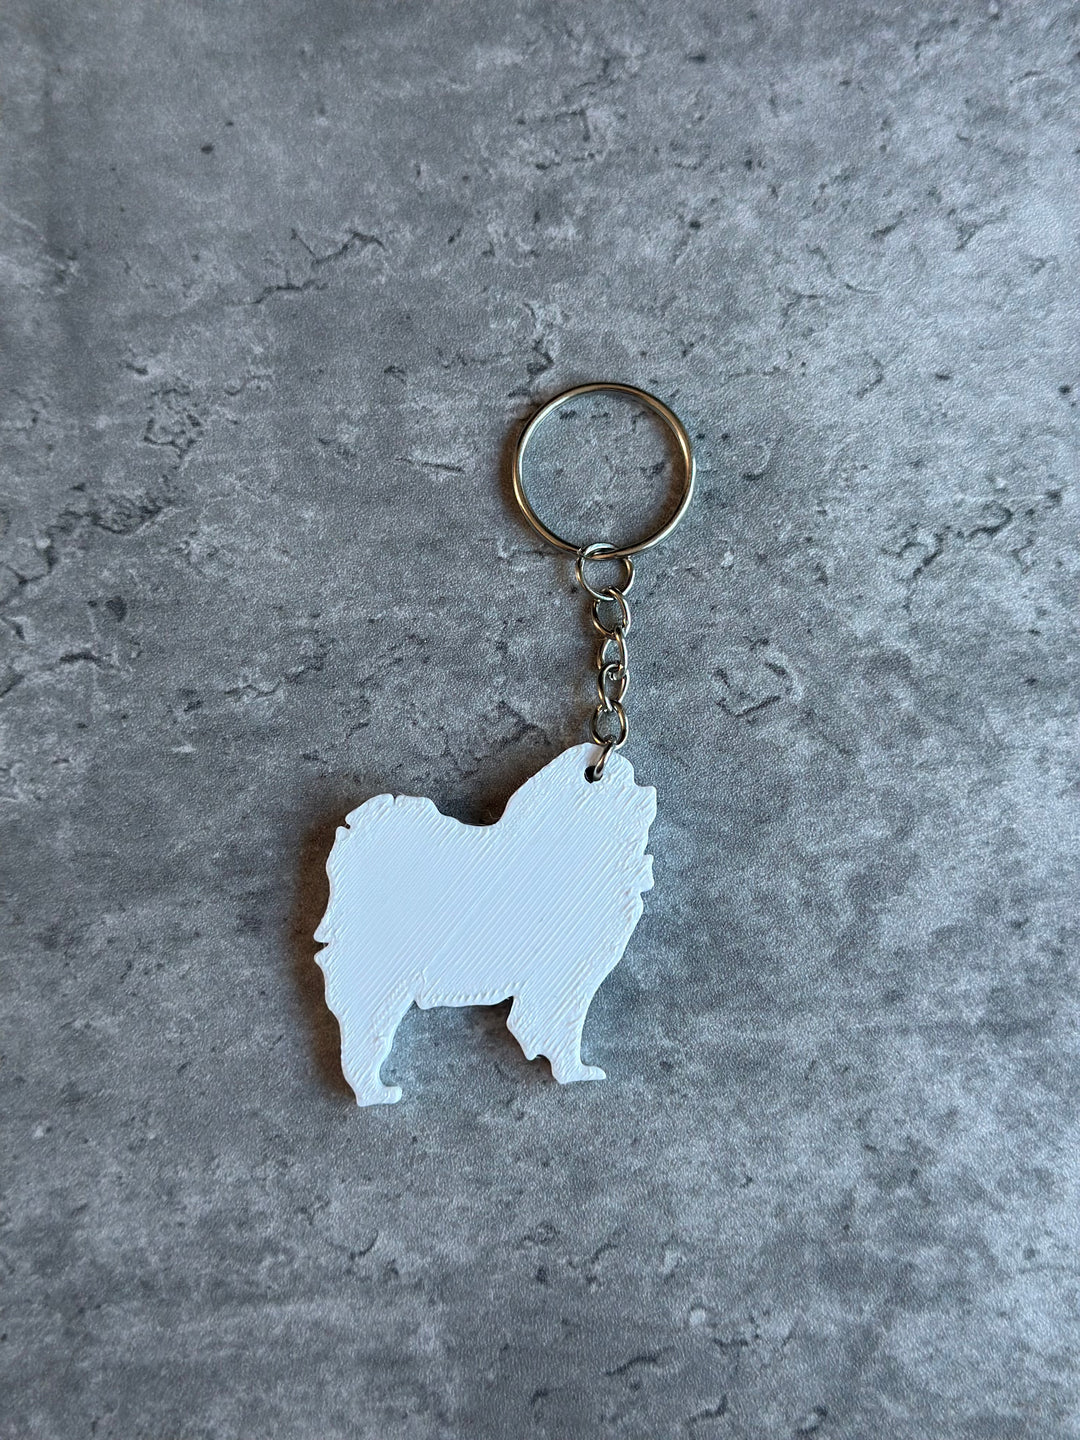 Chow Chow Dog Keyring Stl File | 3D Printed | Unique Personalised Gifts